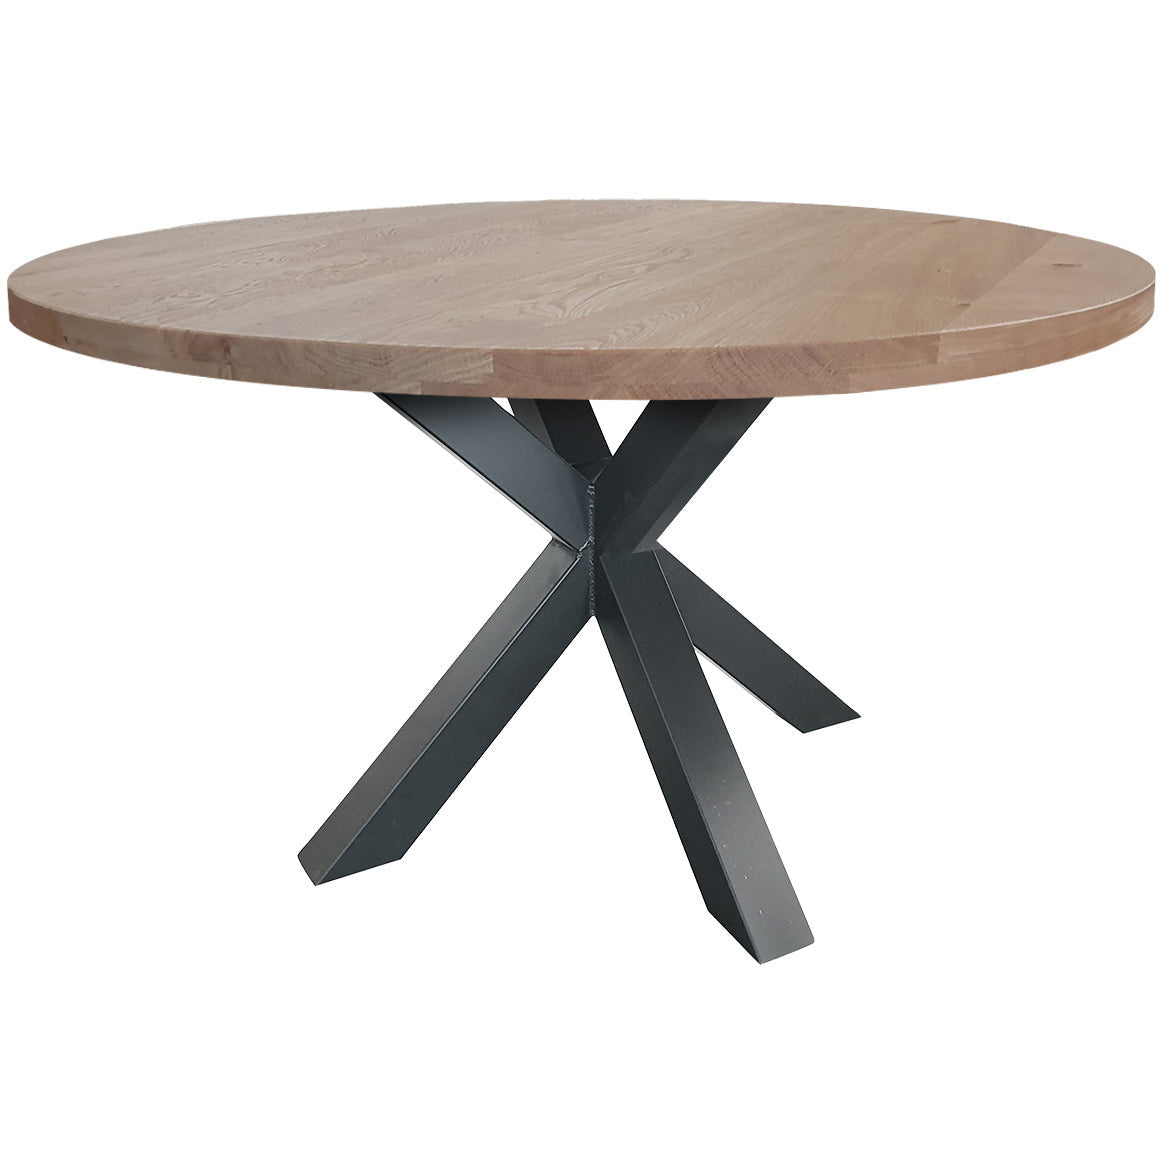 Dining table | Round | Natural | Oak wood | Lacquered Spider Leg |